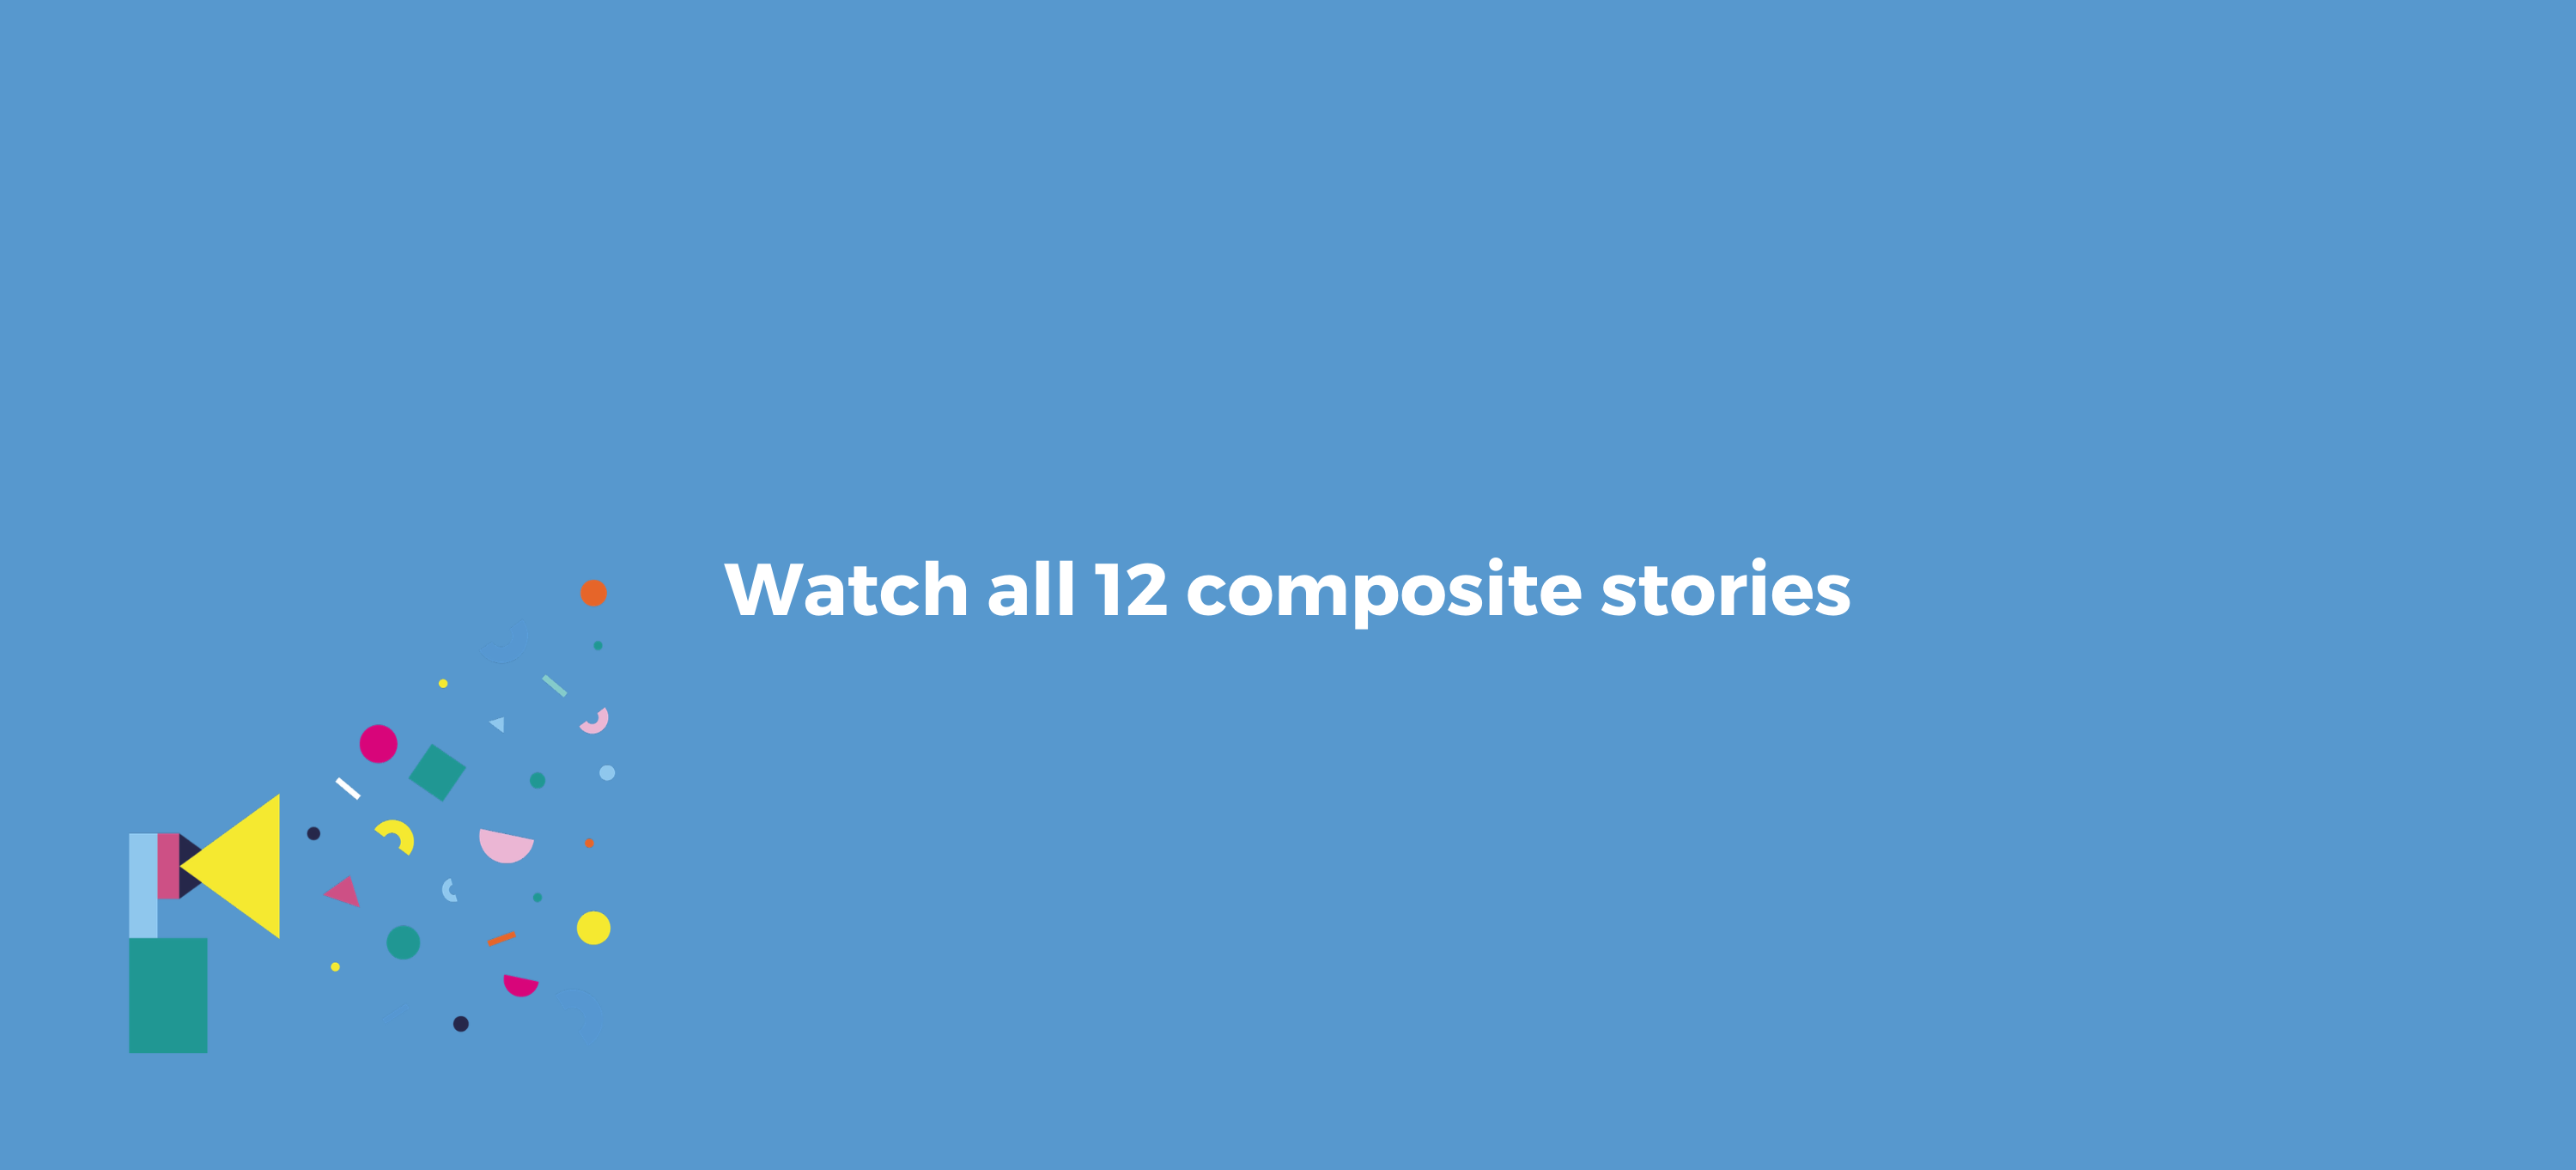 Watch all 12 composite stories